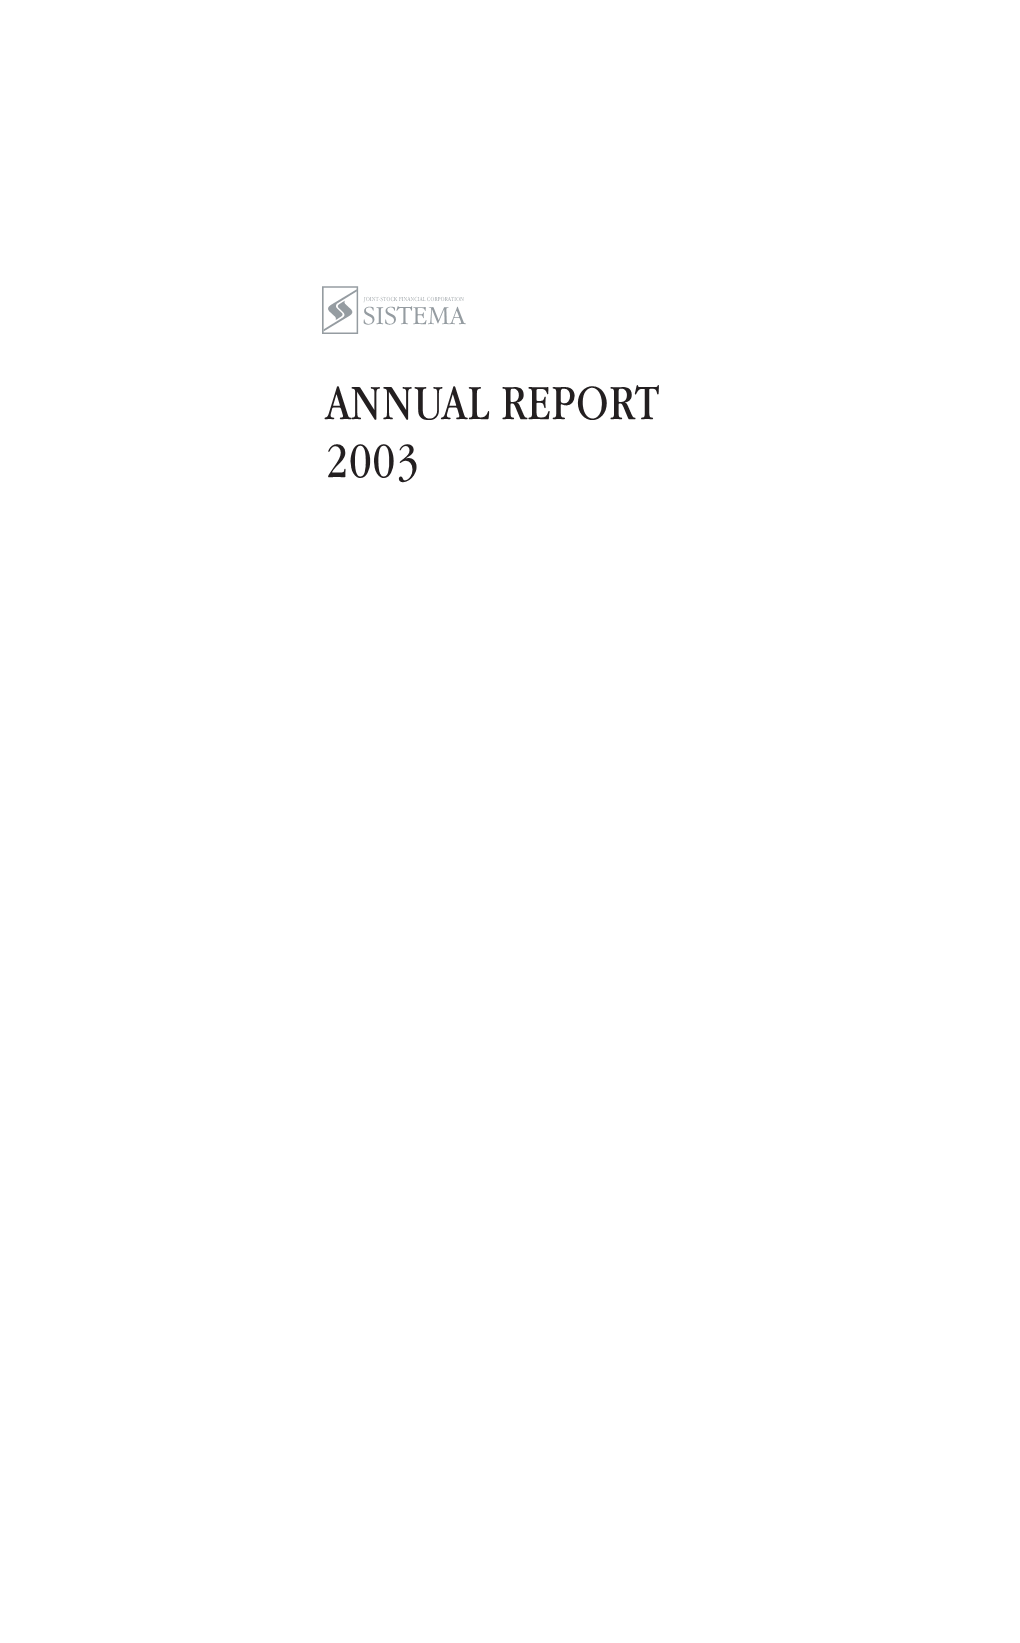 ANNUAL REPORT 2003 Contents